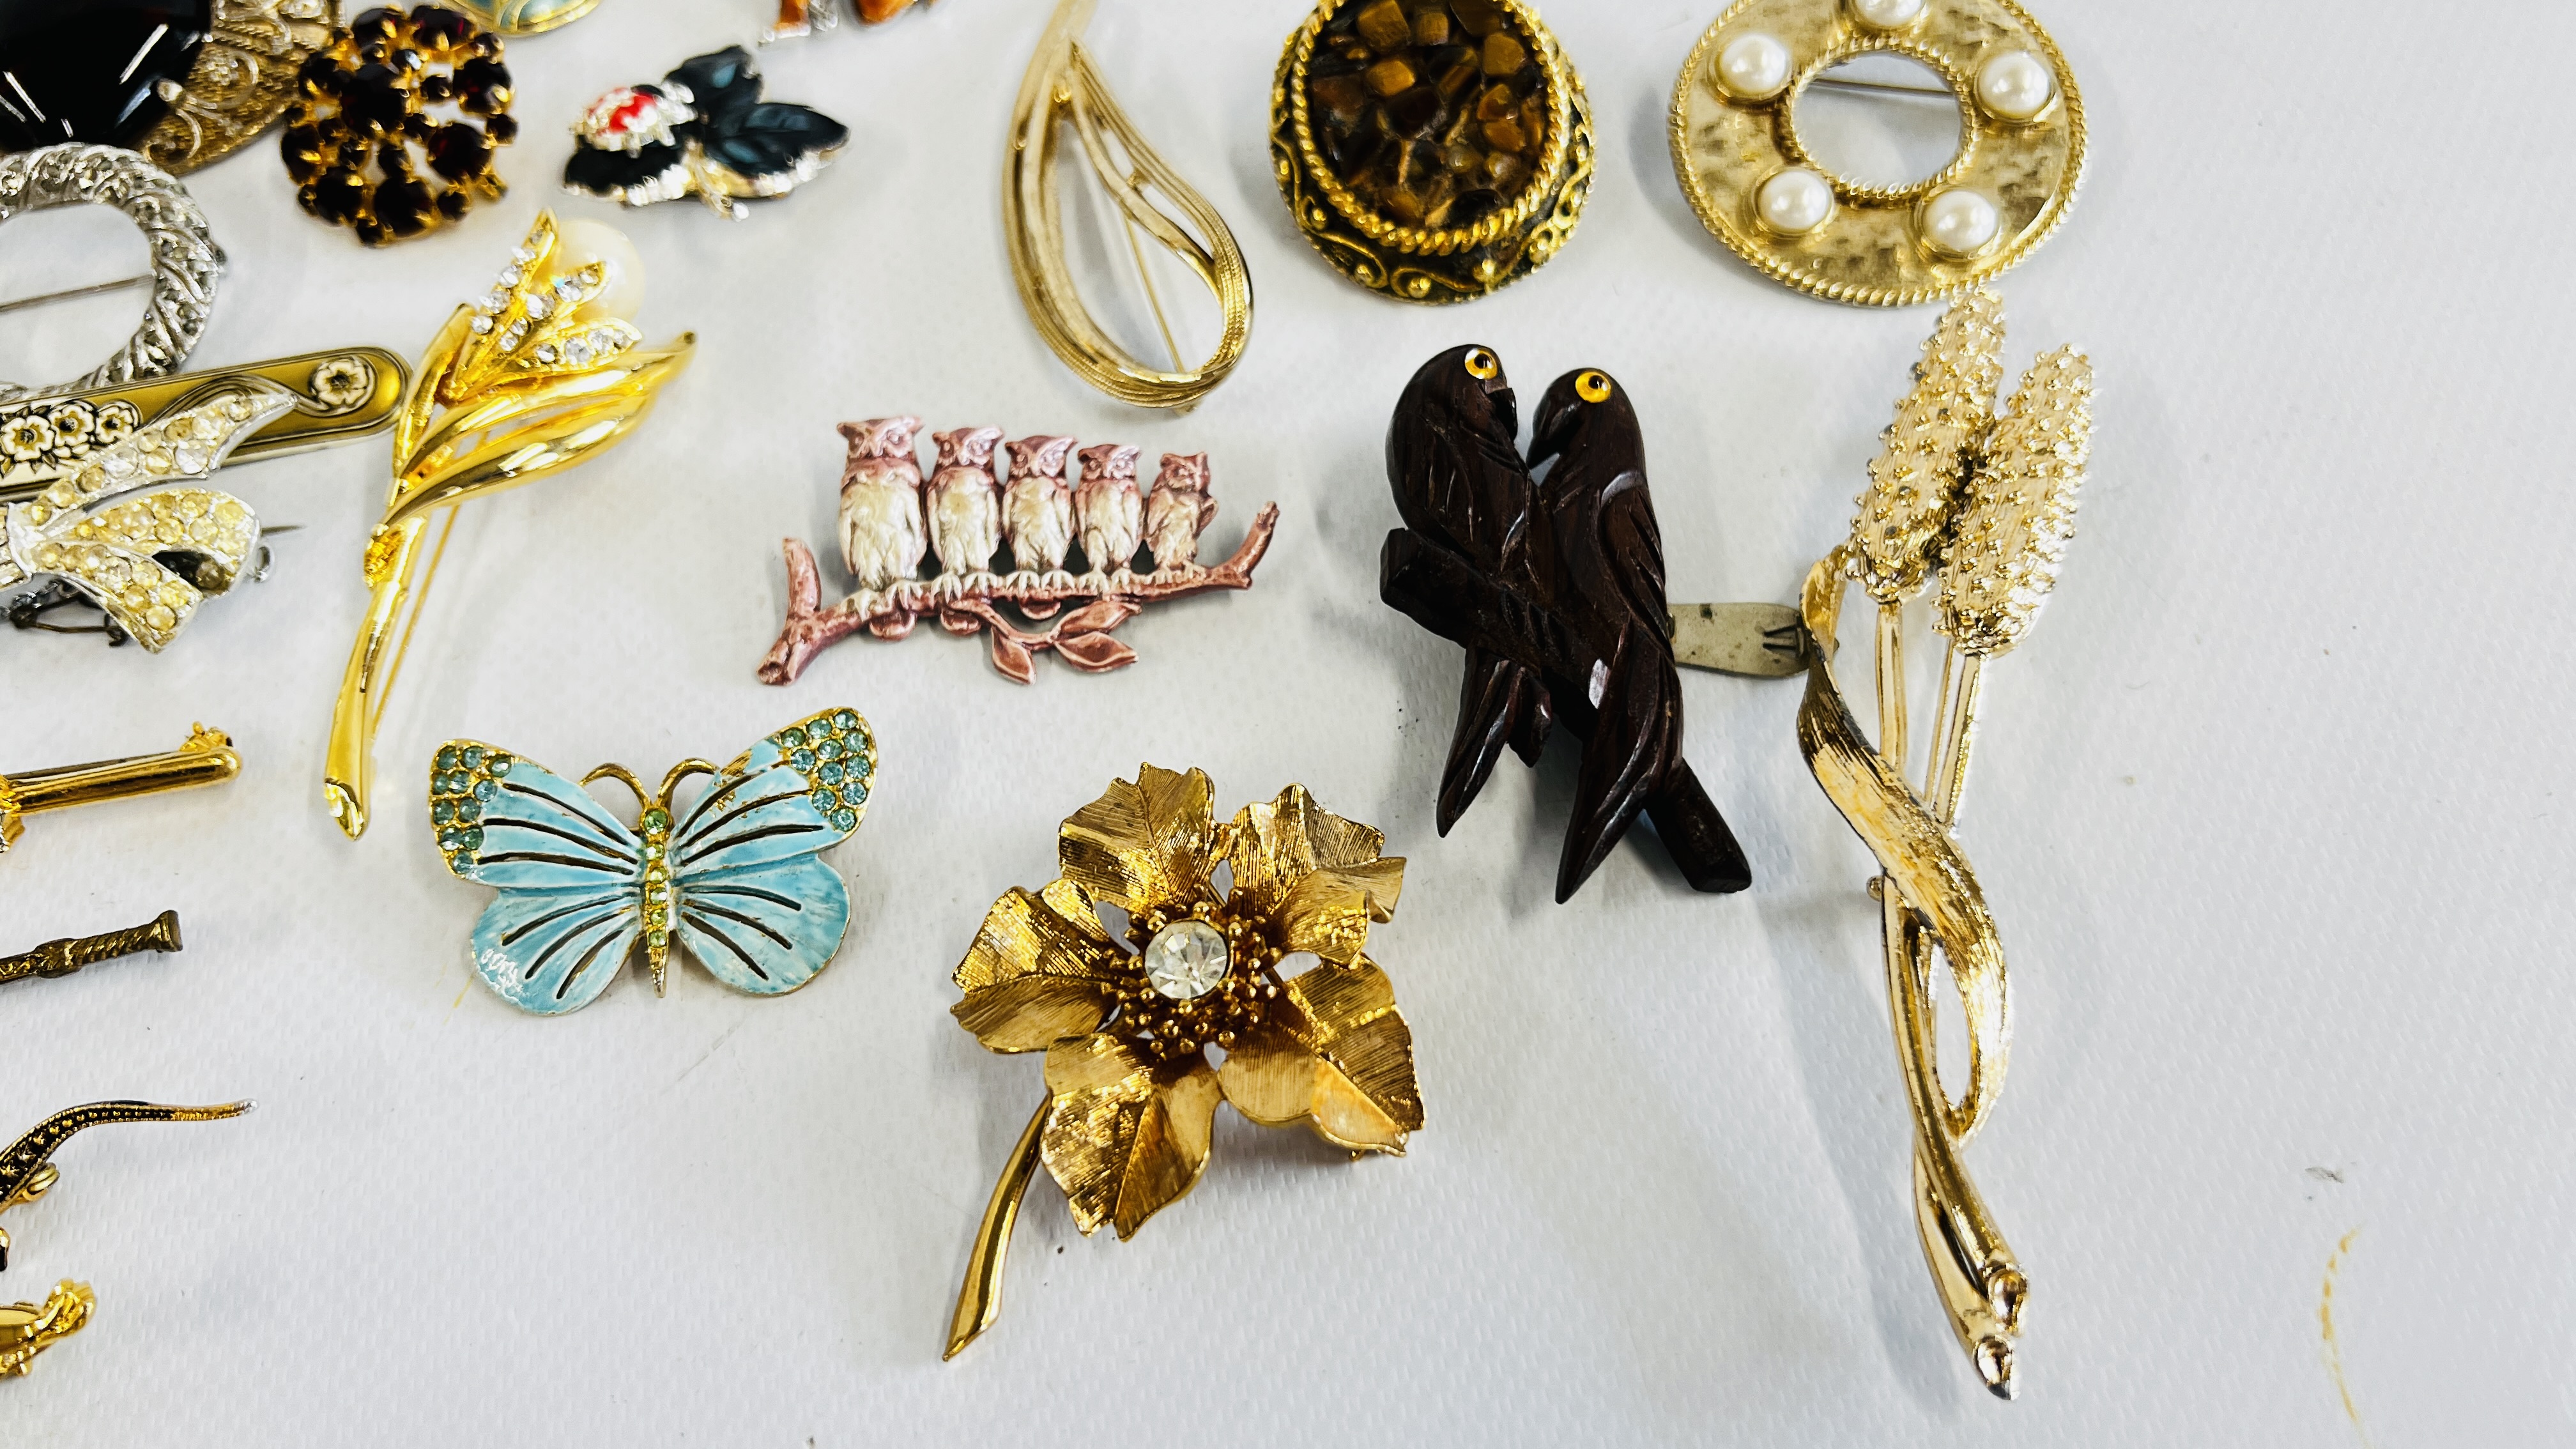 33 ASSORTED VINTAGE COSTUME BROOCHES INCLUDING ANIMALS, OWLS, TIGERS EYE, BIRDS ETC. - Image 2 of 5